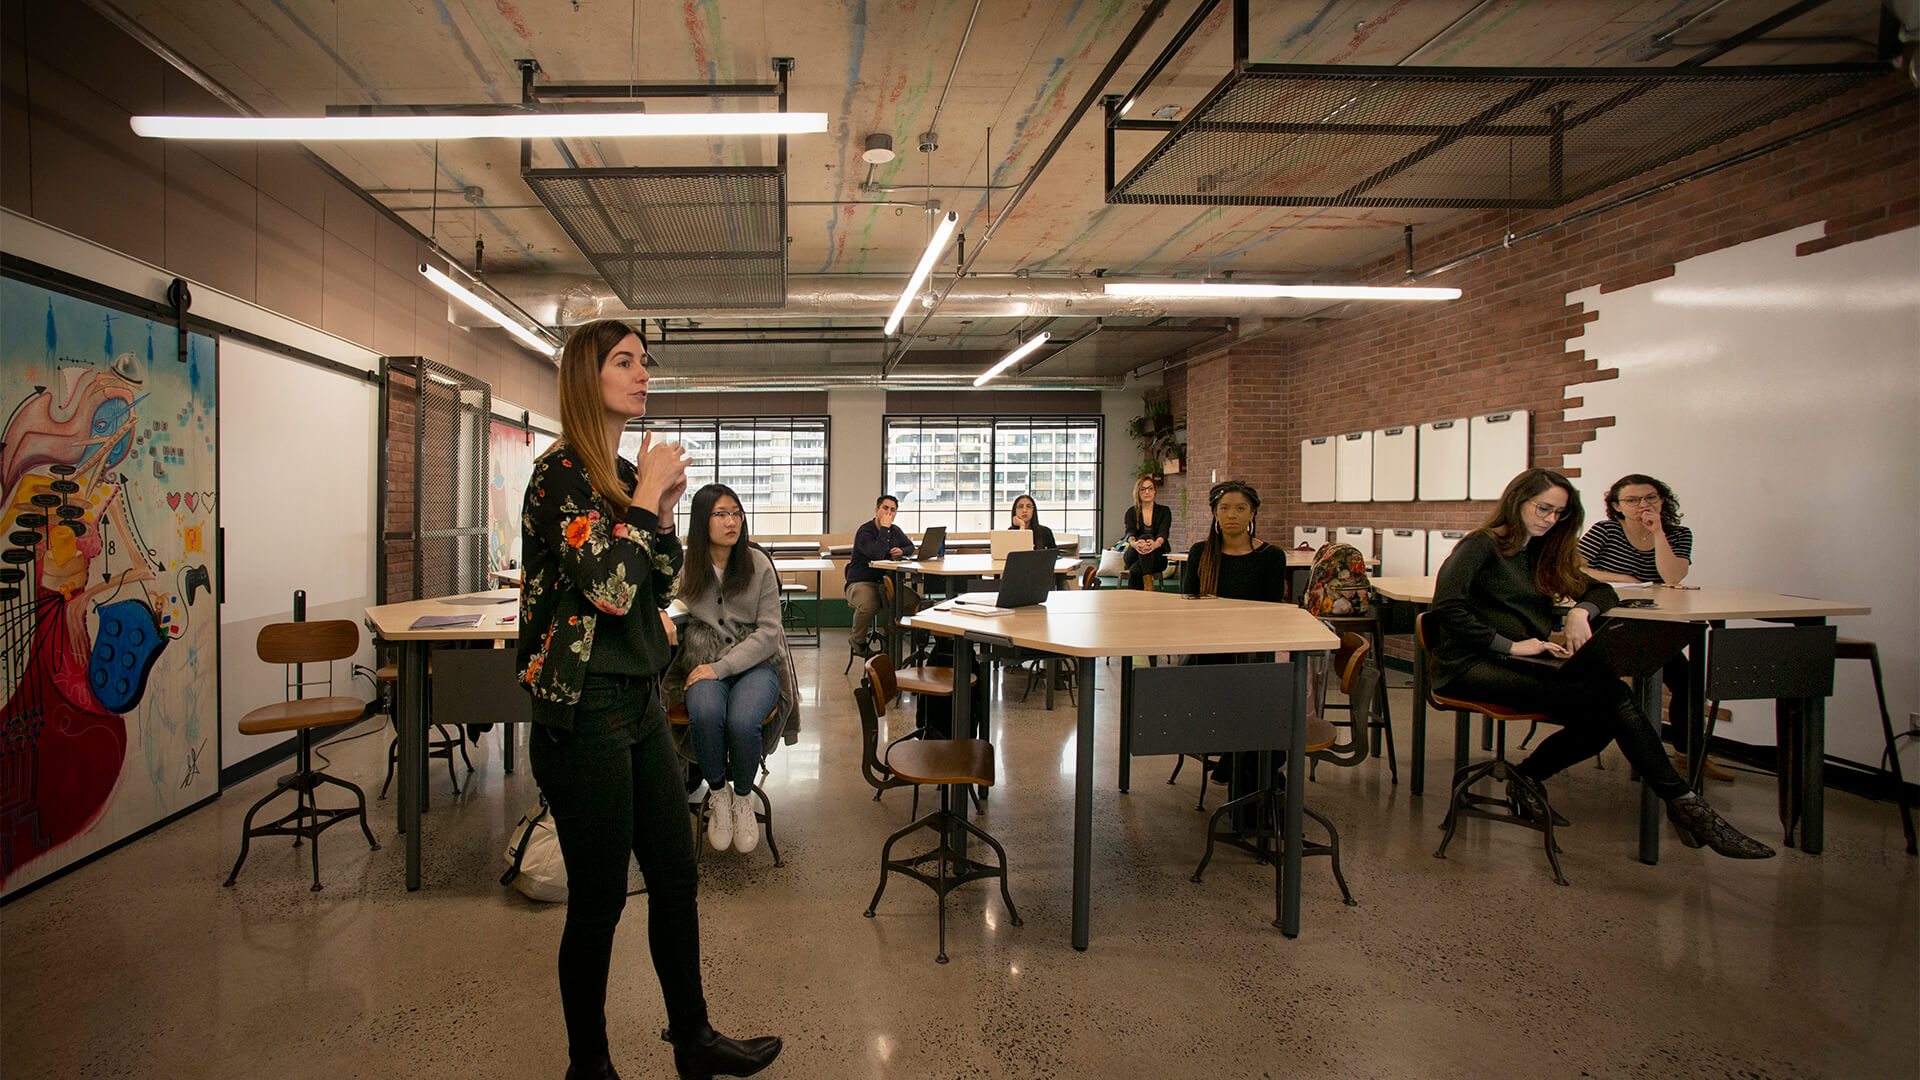 A presenter addresses a diverse group of attentive participants in an urban loft-style workshop space.